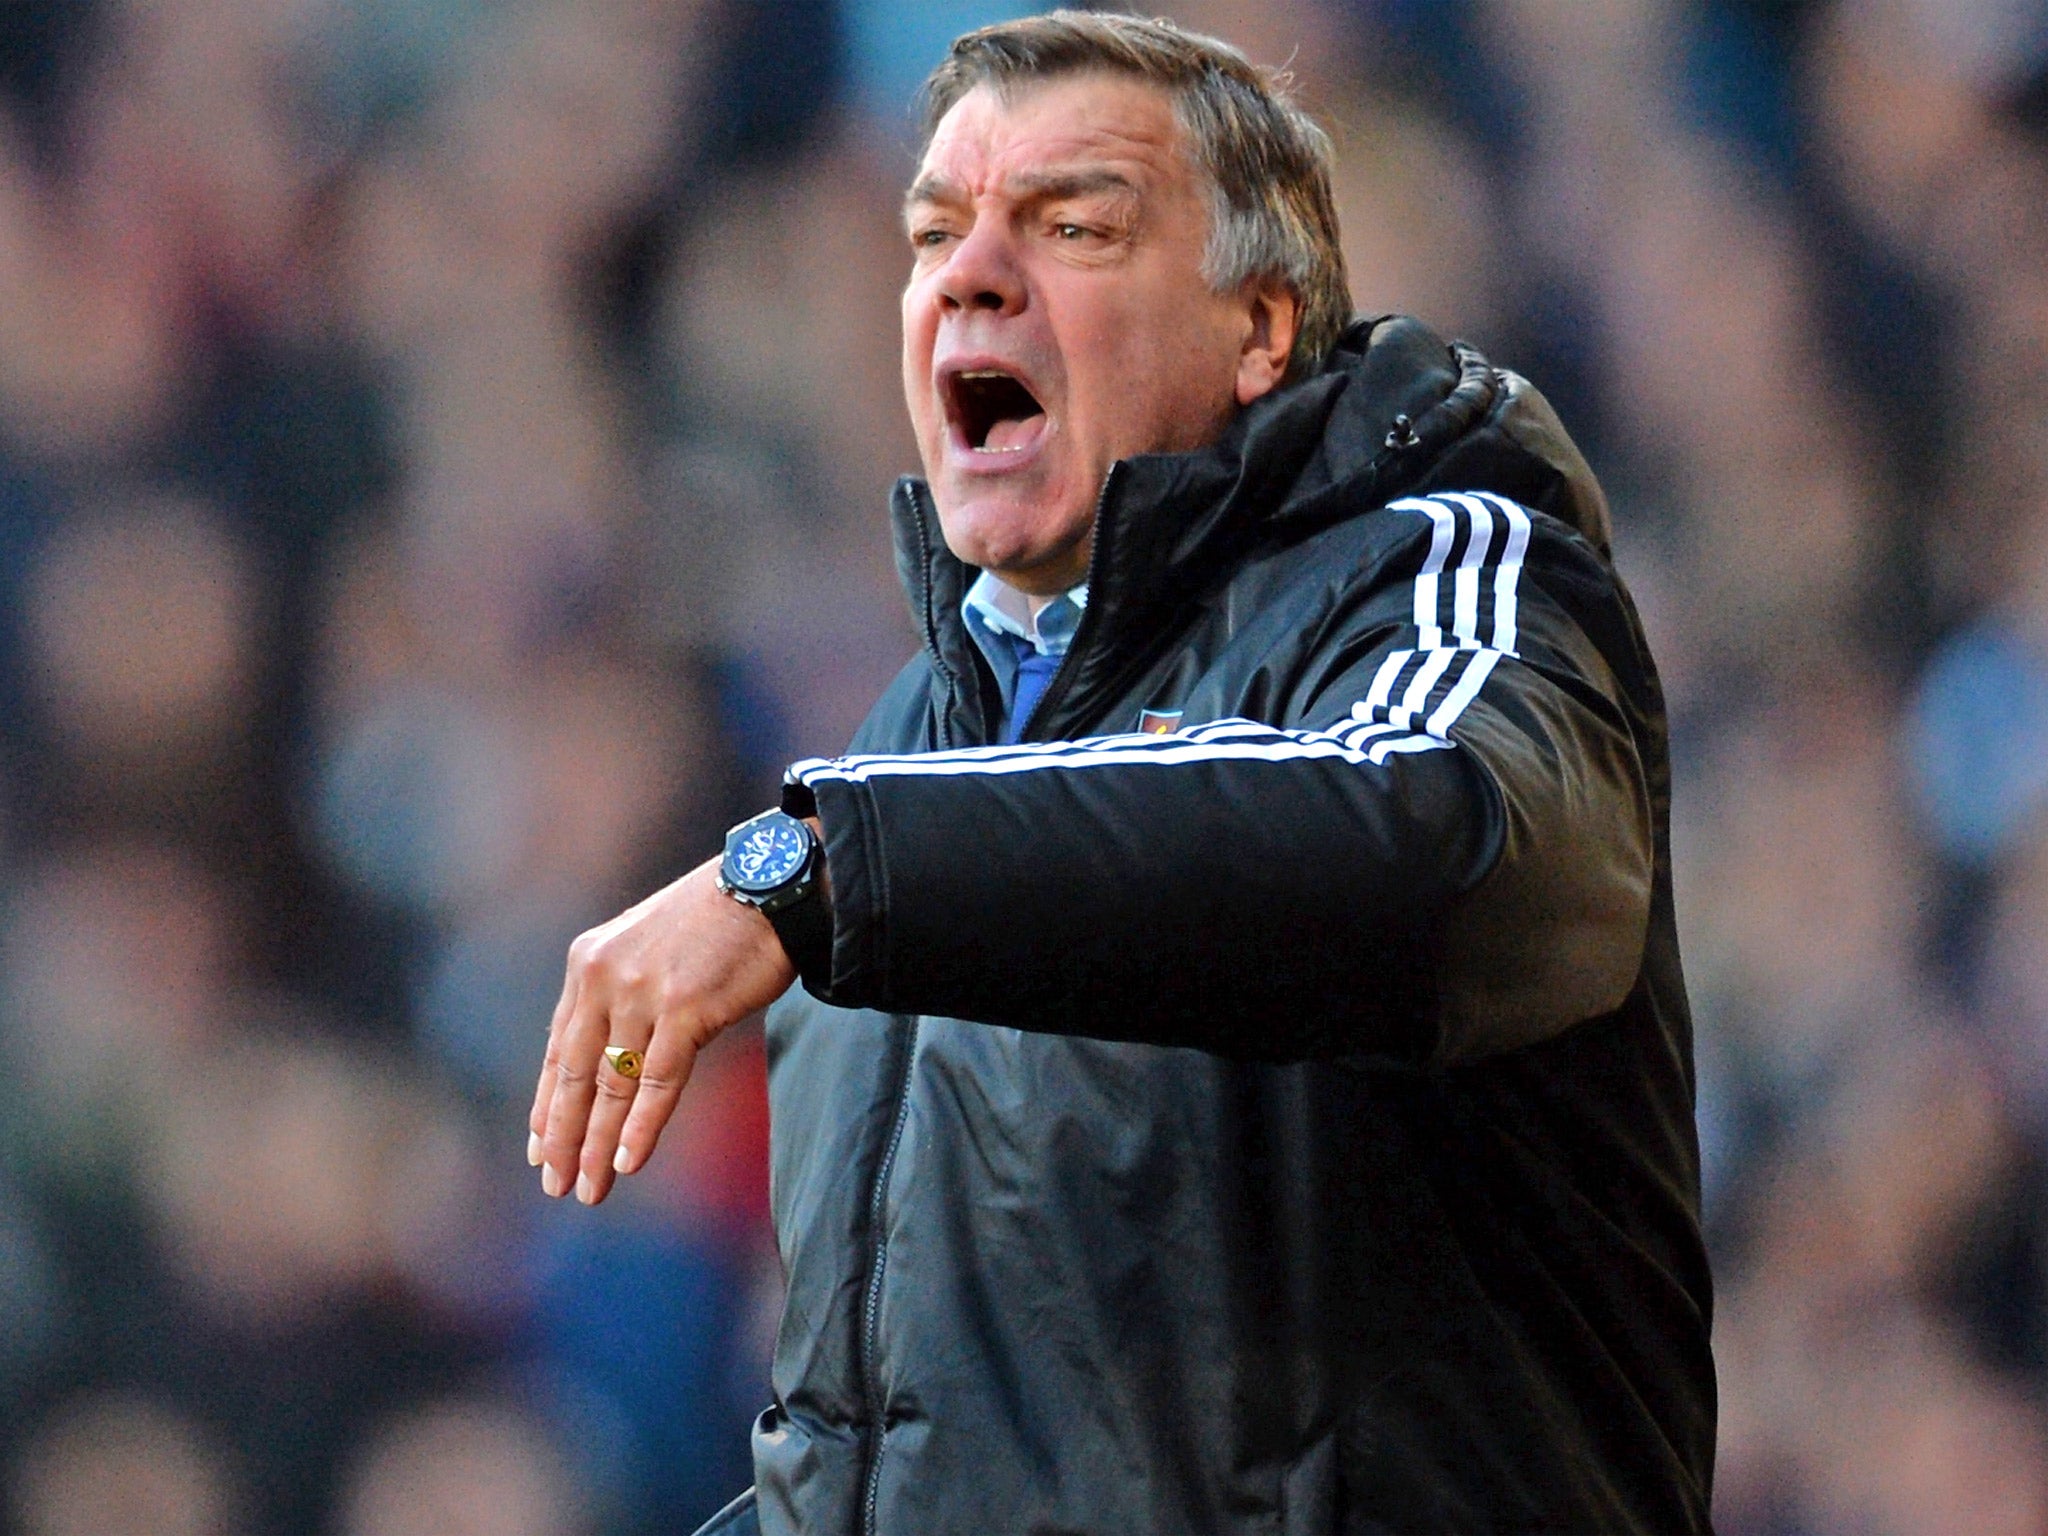 Sam Allardyce claims to have the support of the co-chairmen